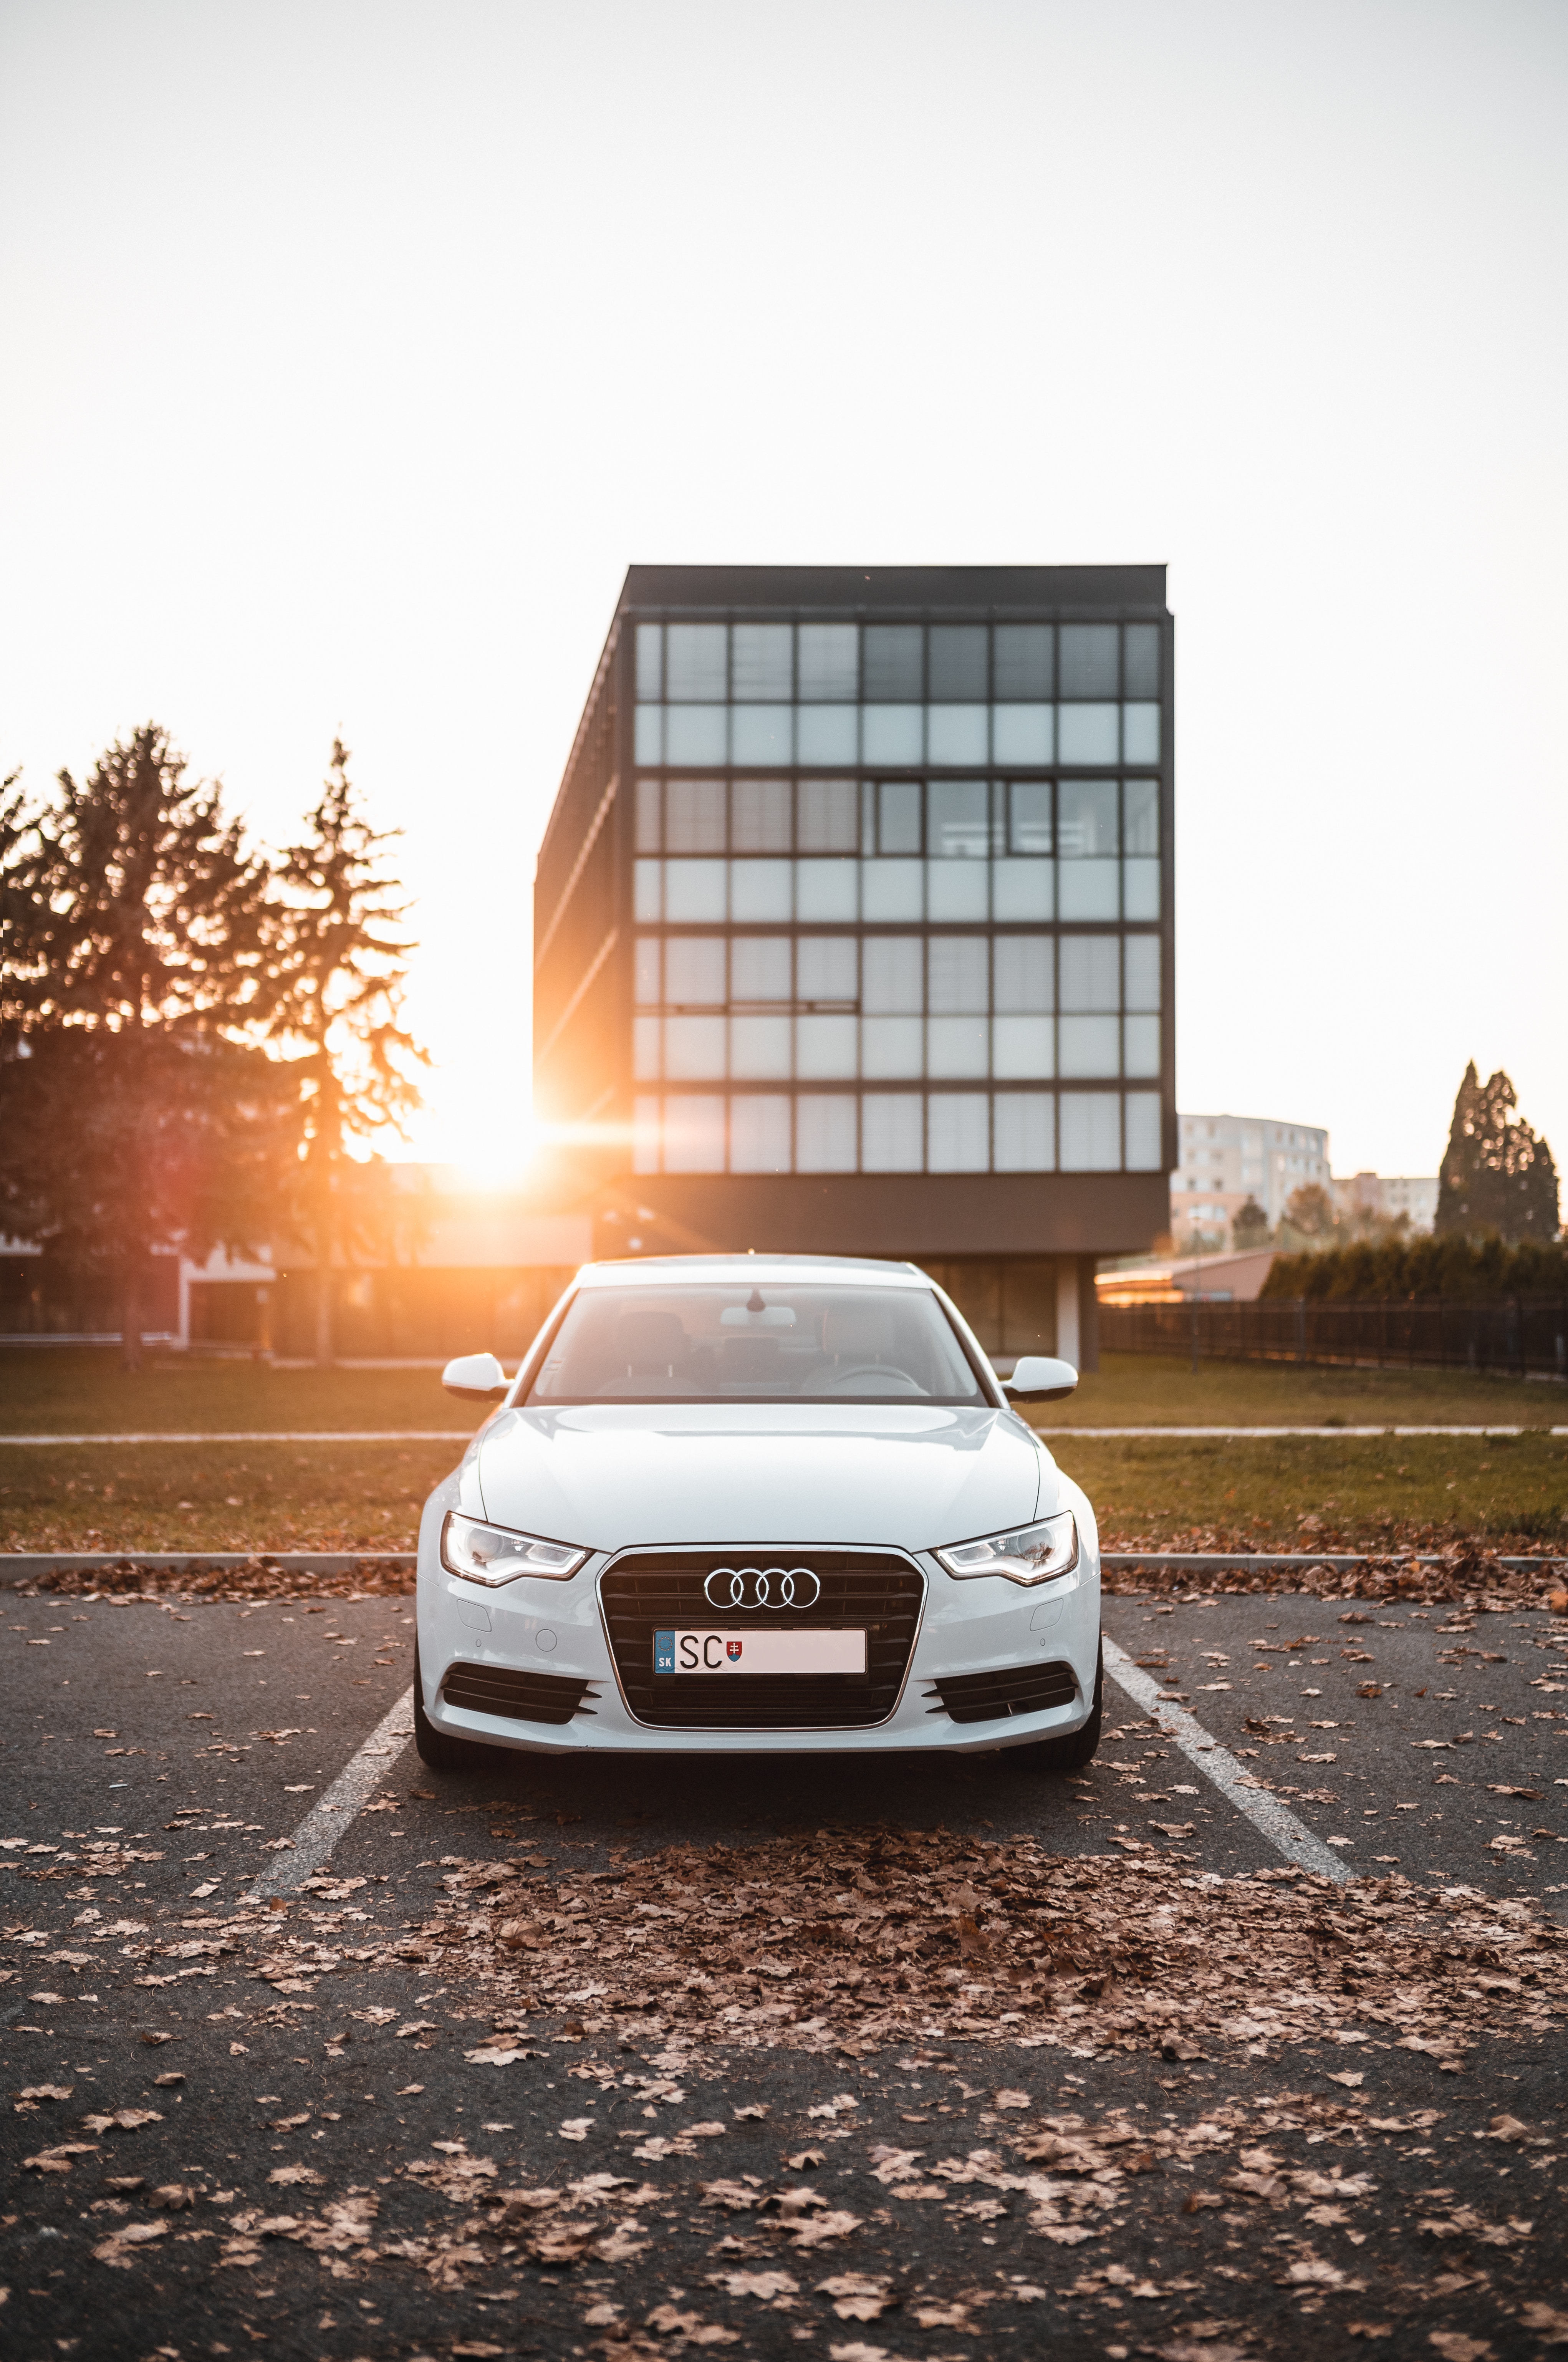 Popular Audi A7 Image for Phone